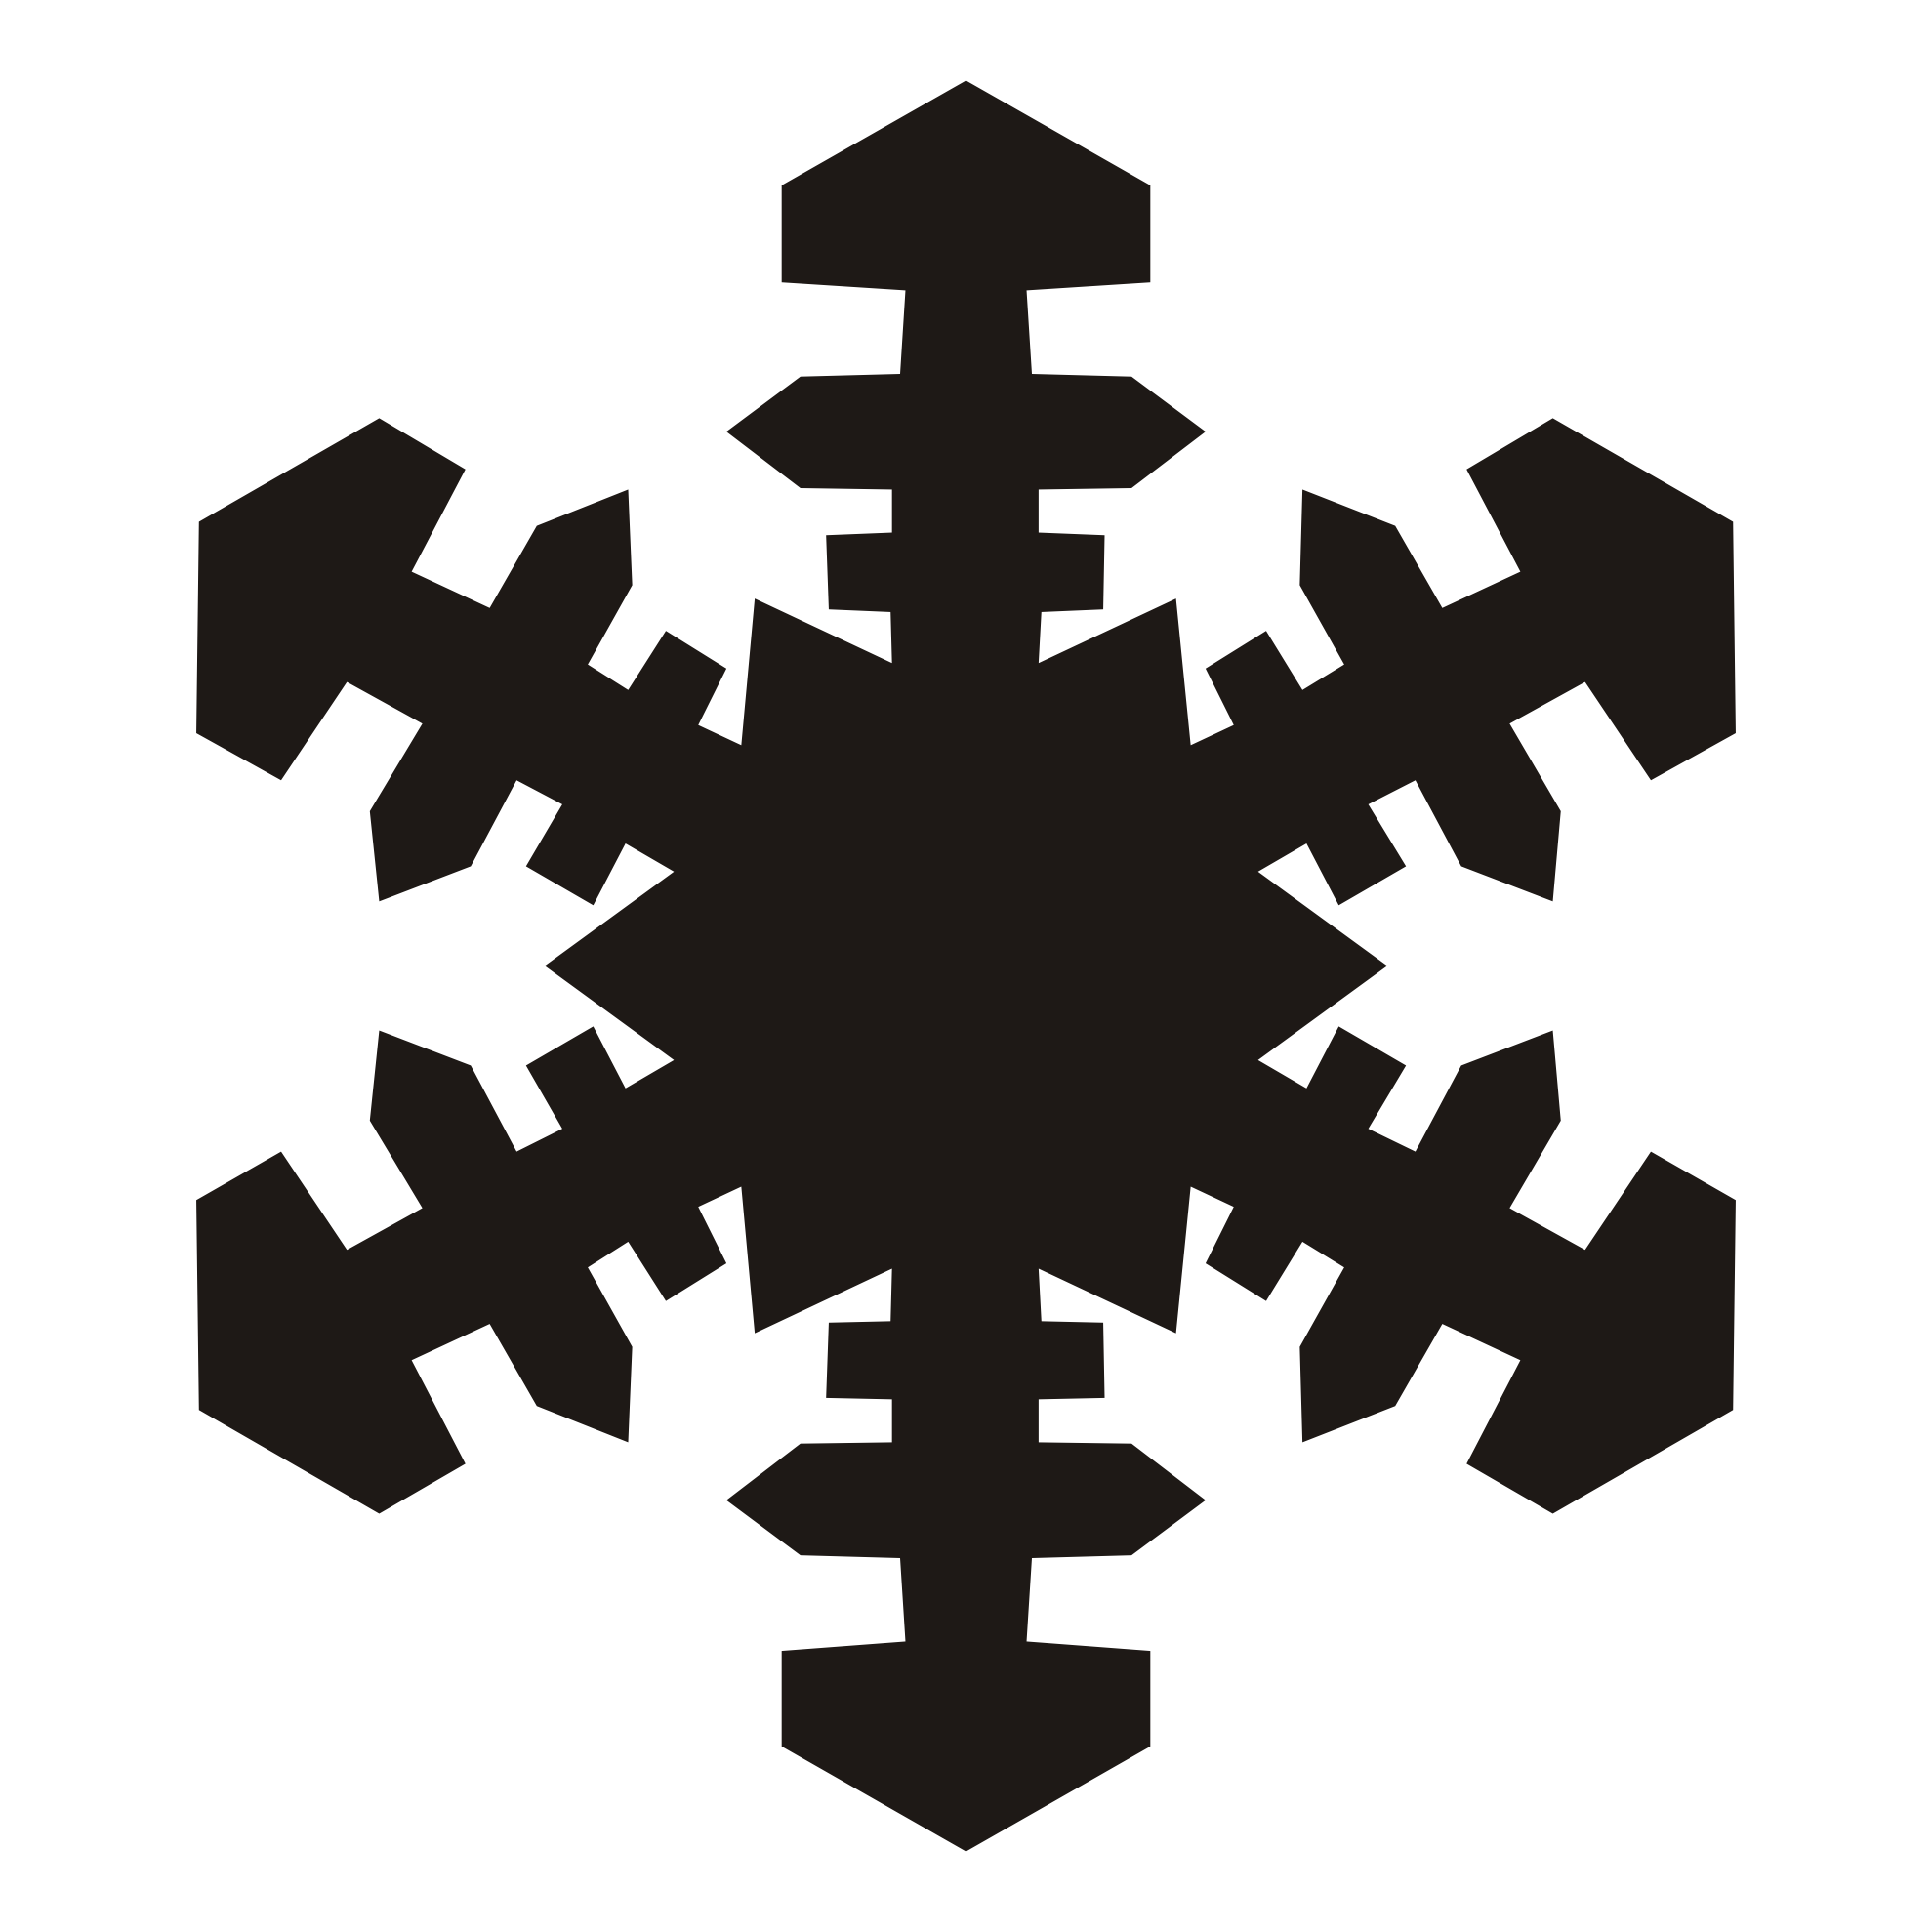 Christmas silhouette at getdrawings. Winter clipart symbol